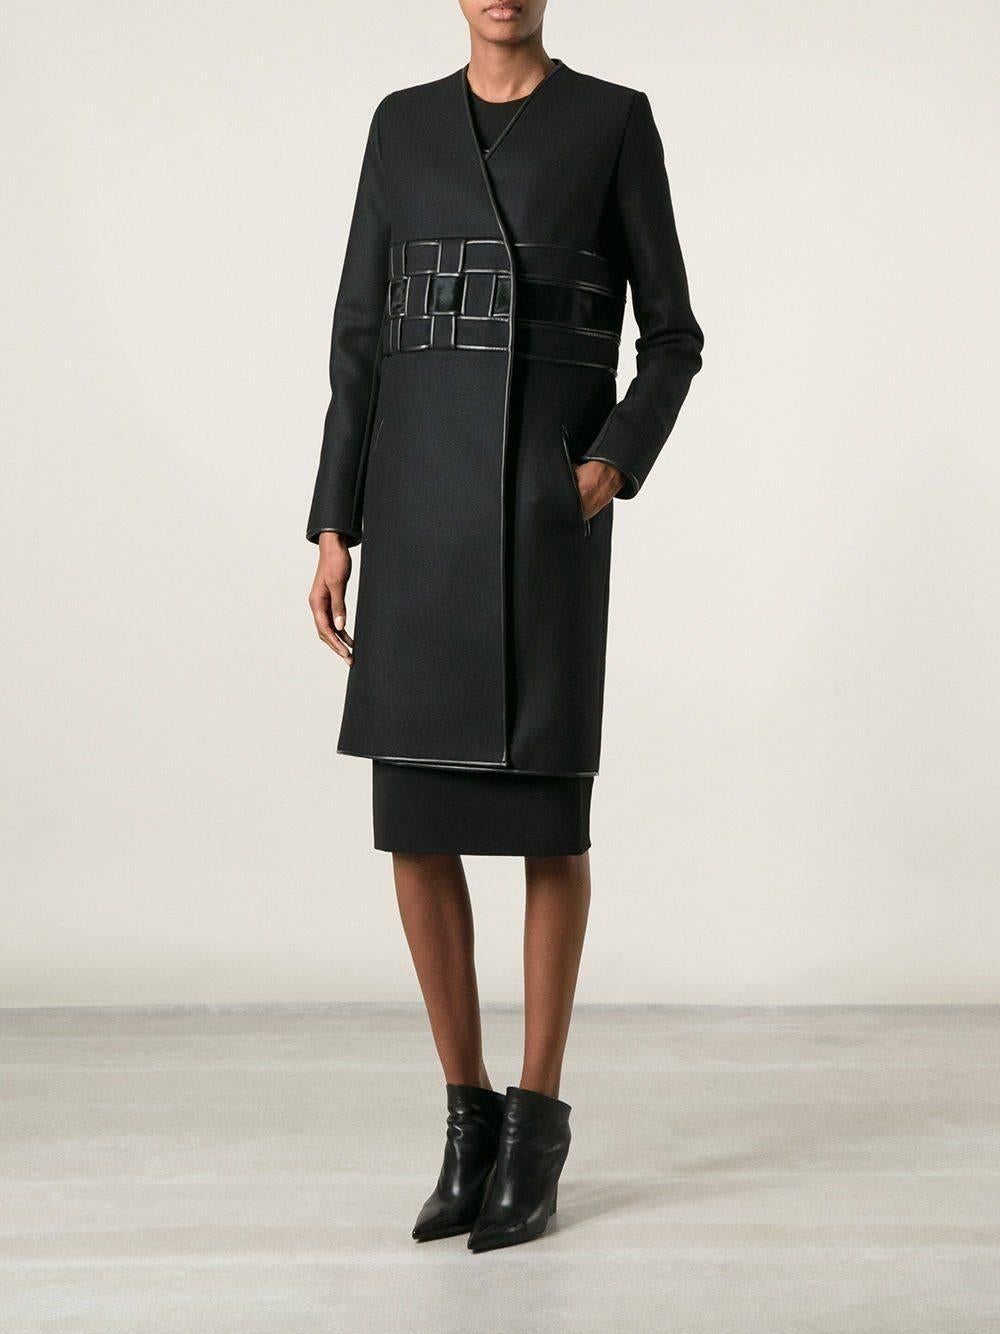 New DAVID KOMA Leather Wool Fur Woven Detail Coat UK 10 
Black wool blend and calf hair woven detail coat from David Koma featuring a v-neck, a wrap style front, a woven design.
 Concealed front fastening, side slit pockets, long sleeves and a